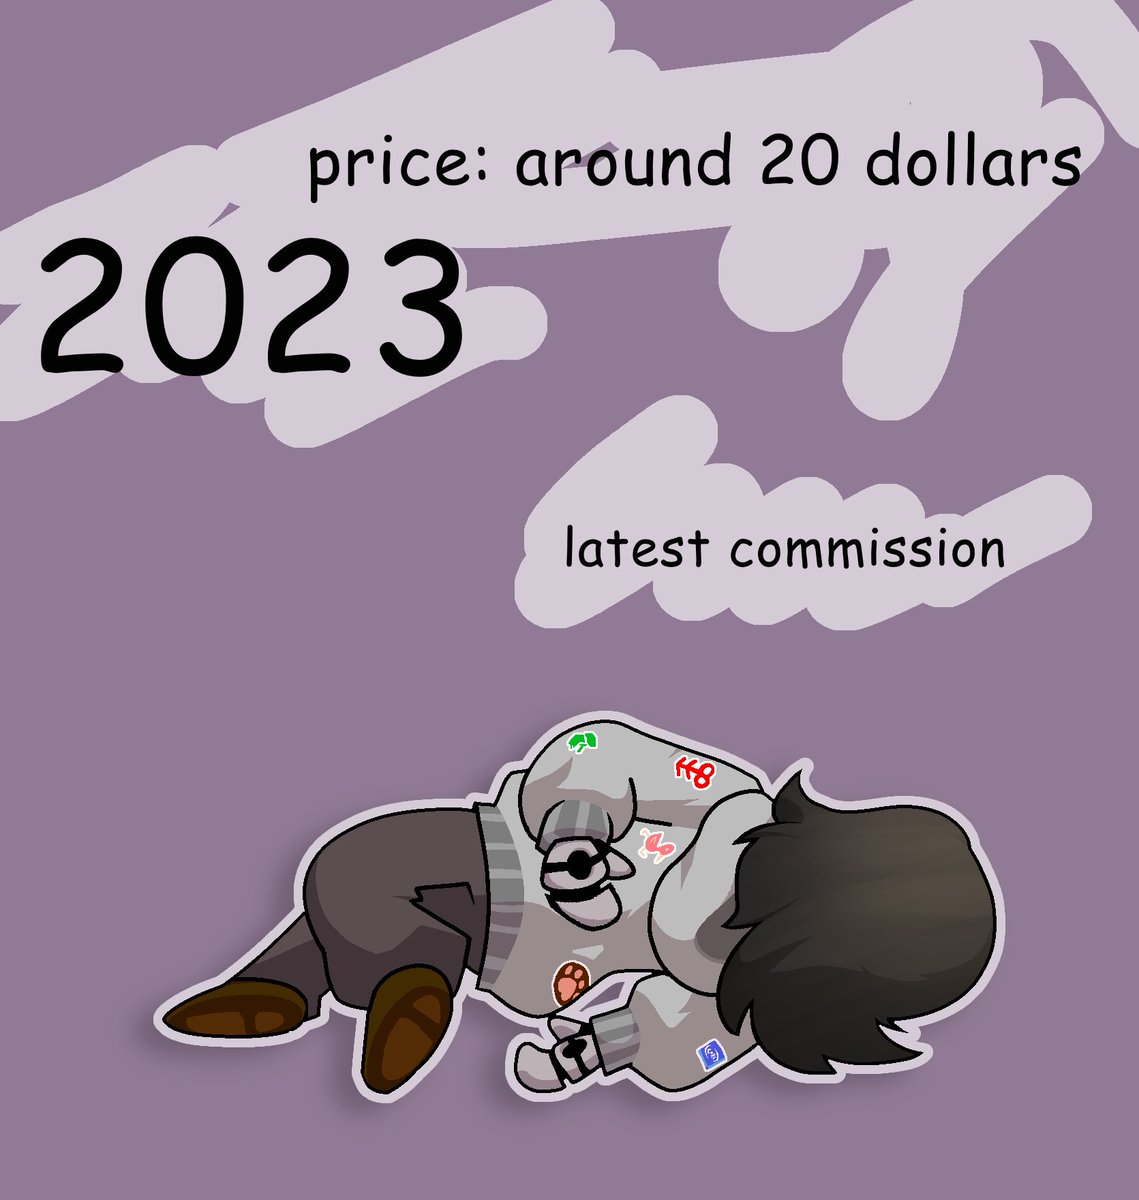 commissions

well, uhh, the pricing certainly got better. 